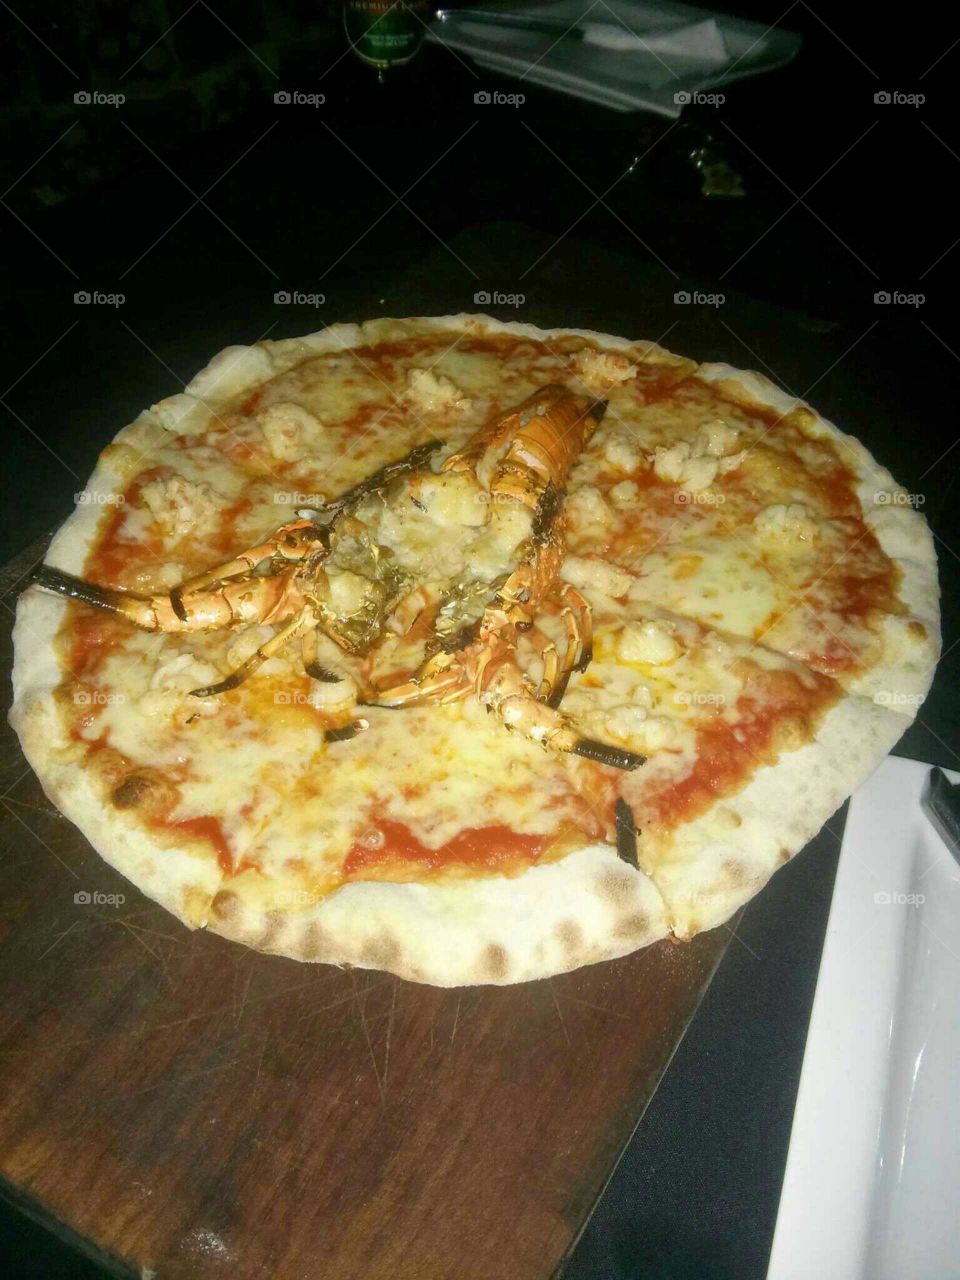 lobster pizza